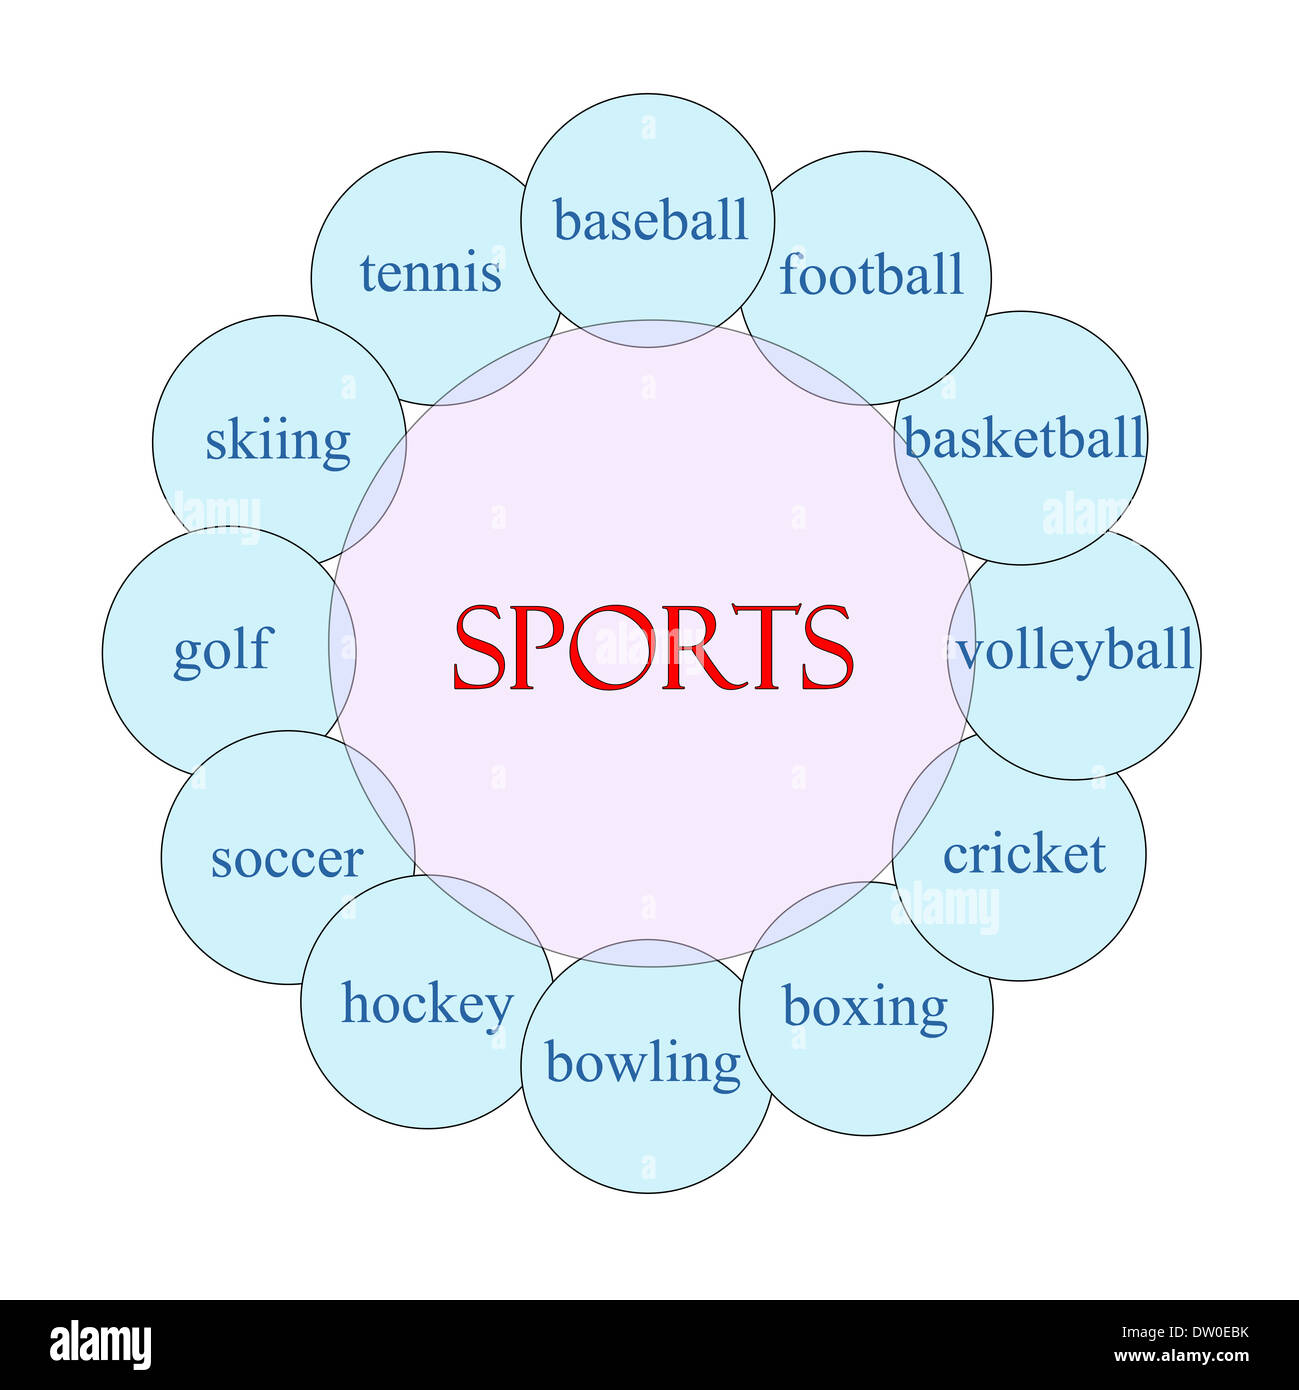 Sports concept circular diagram in pink and blue with great terms such as baseball, football, hockey and more. Stock Photo